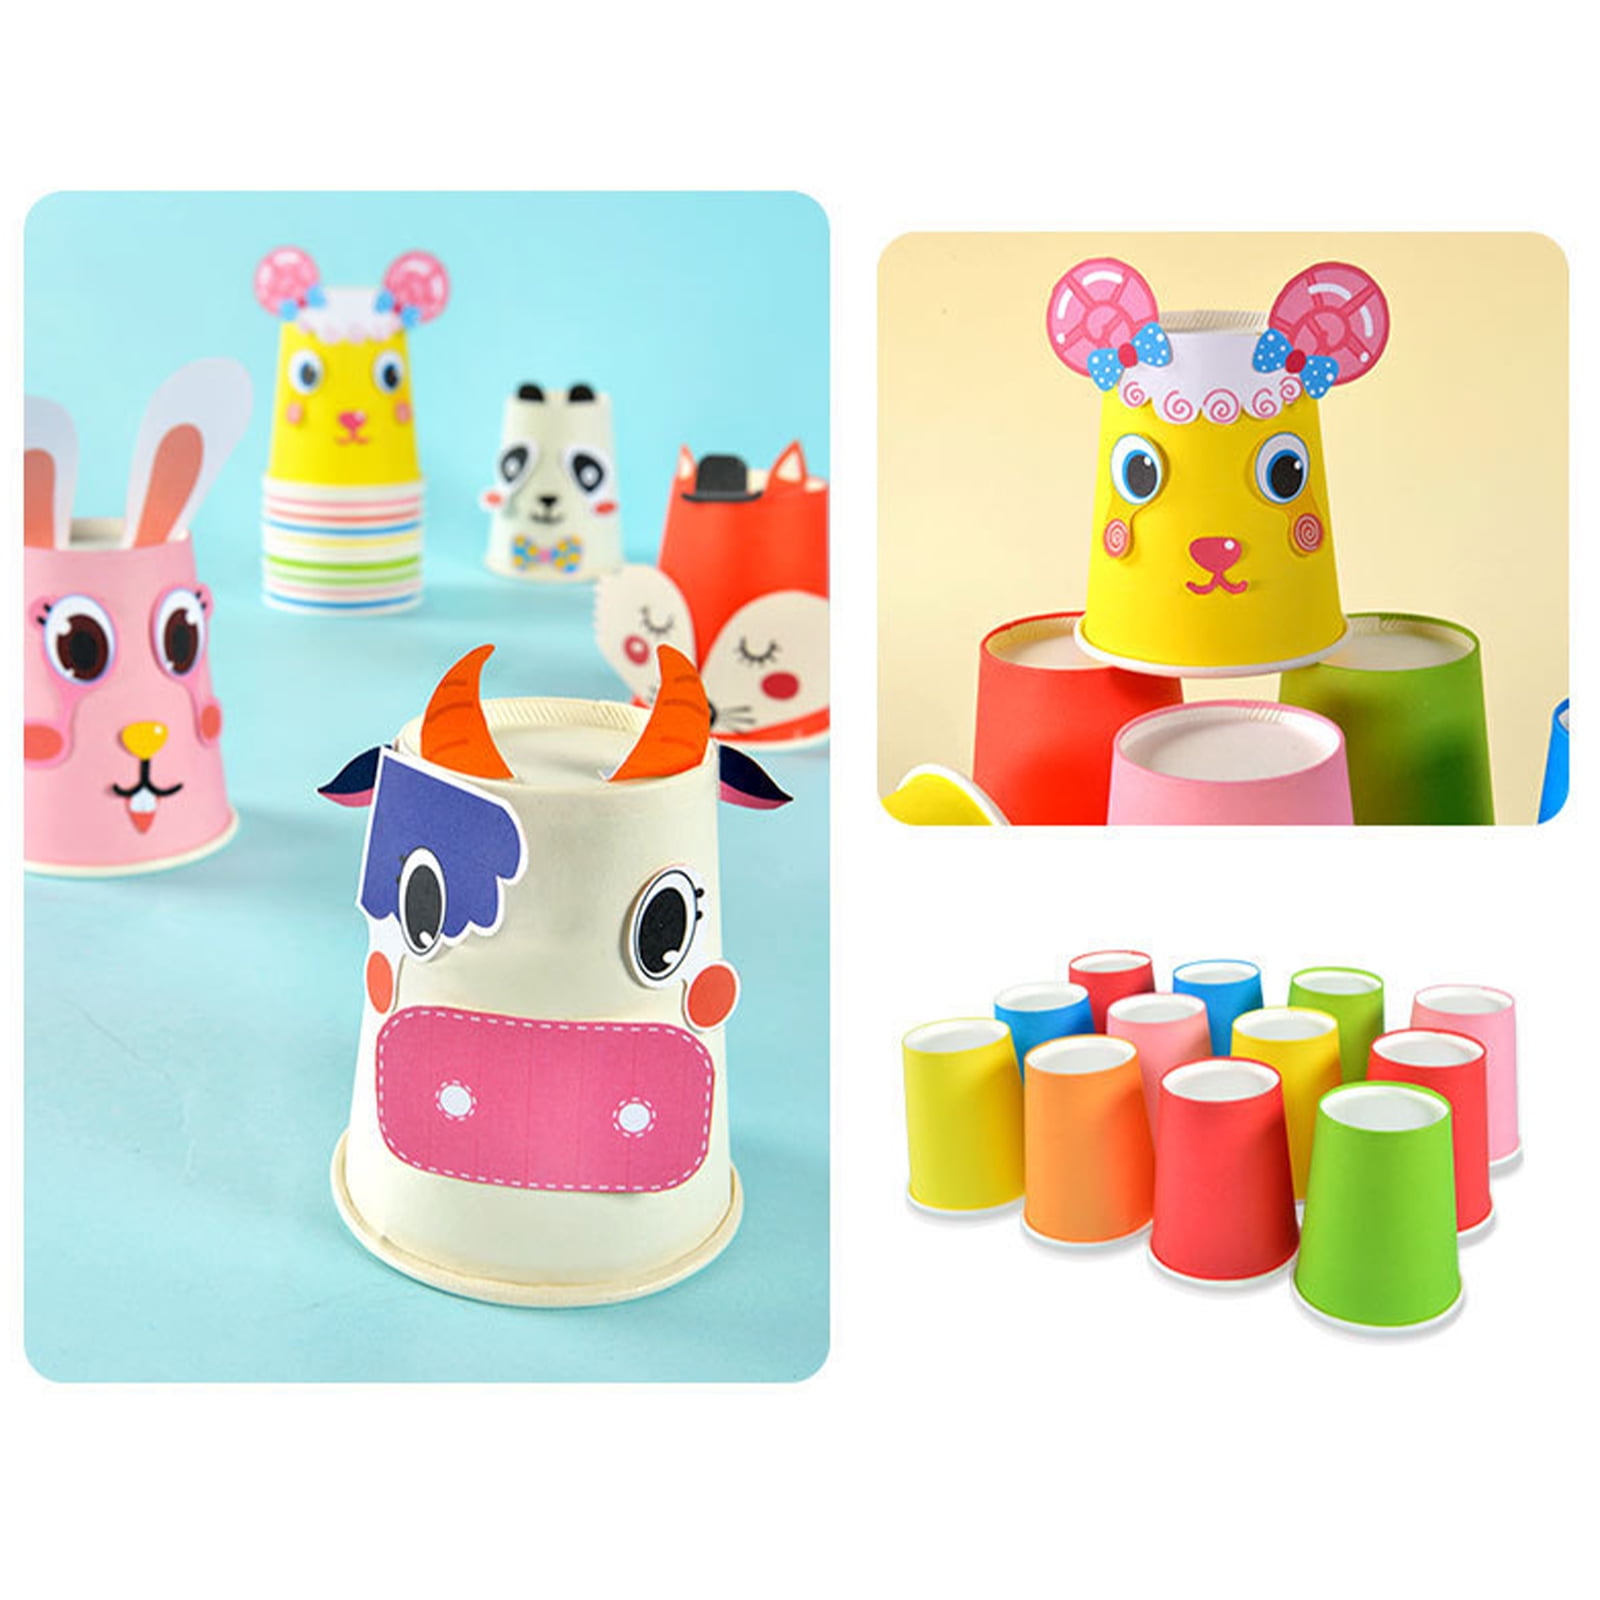 Arts and Crafts Kit for Kids Ages 3, 4, 5, 6 – Craft 8 Cute Animal Projects  – Gift Crafts Set for Girls & Boys Ages 4-8